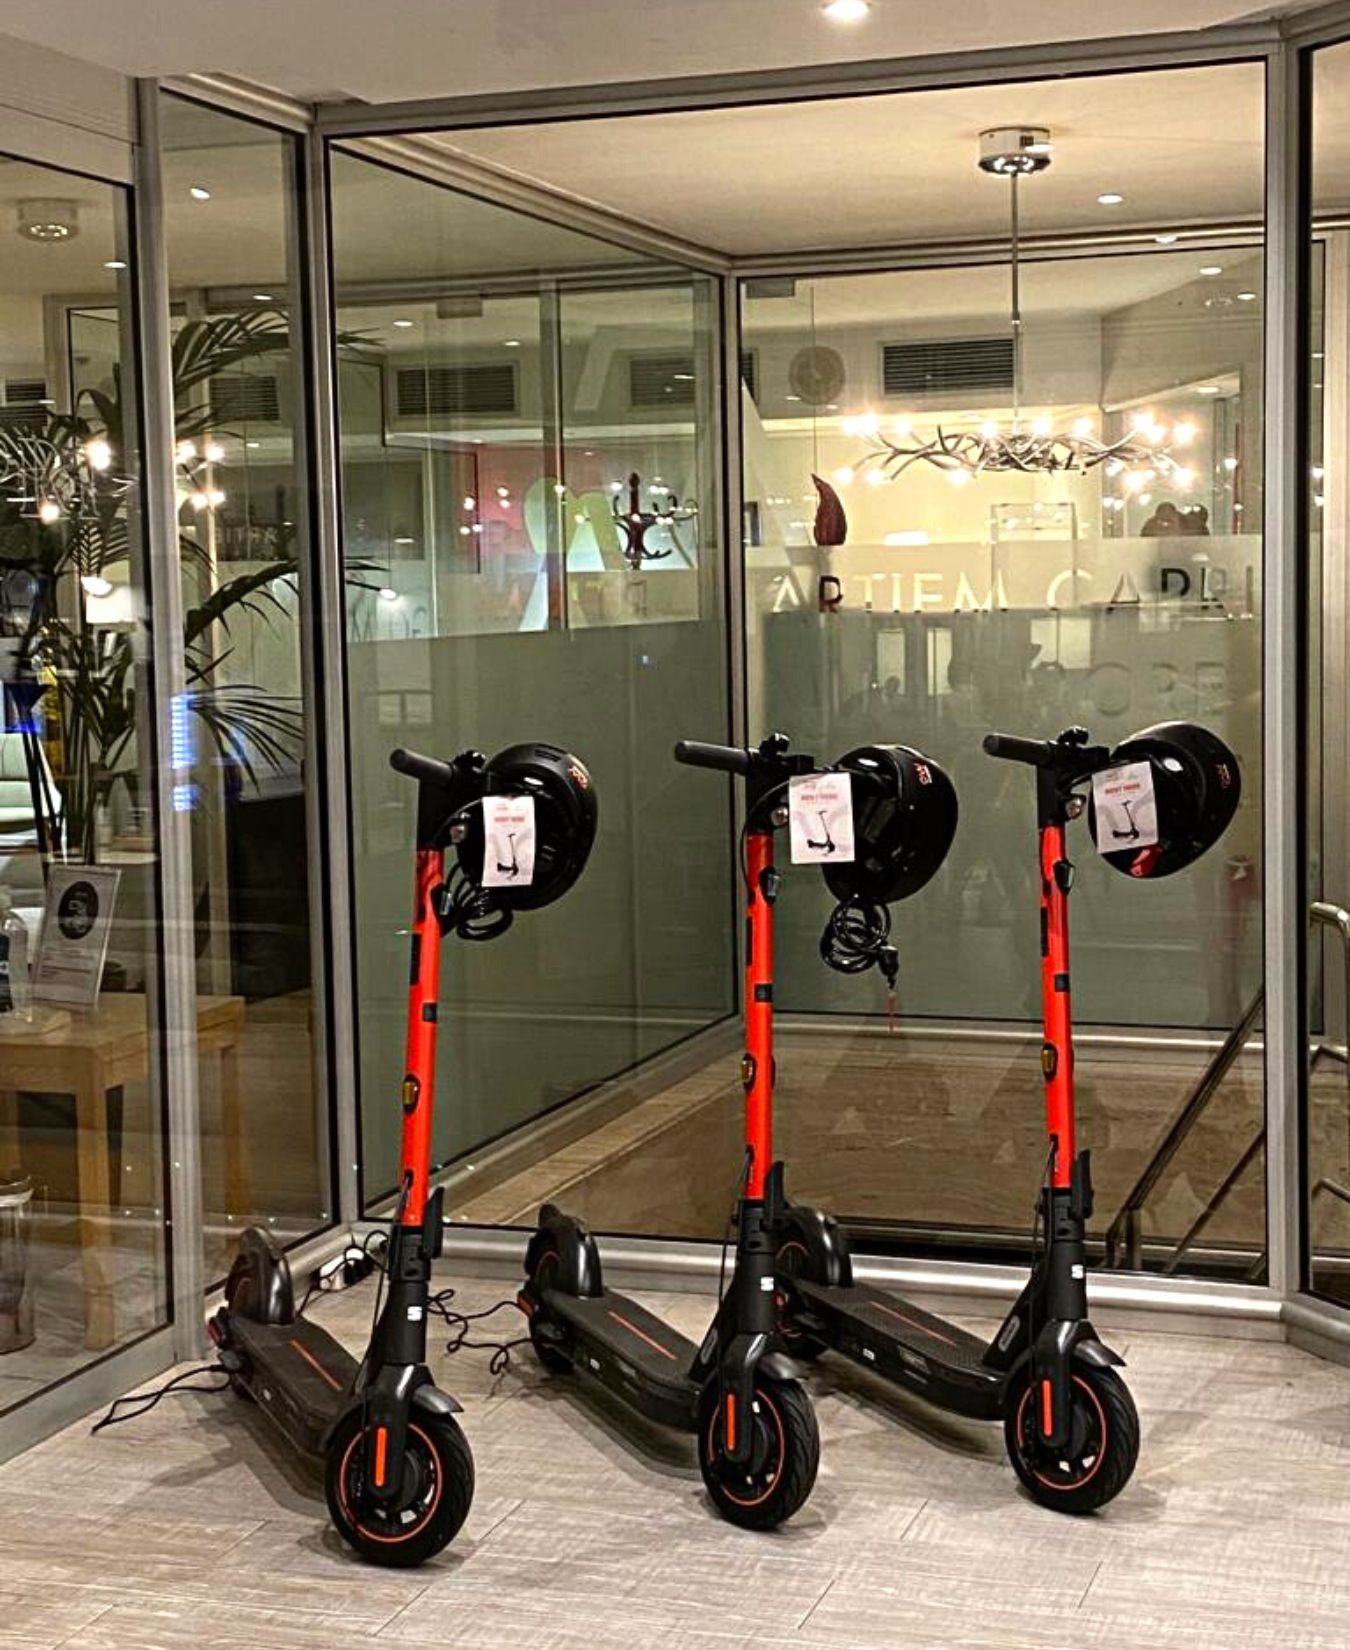 electric scooters artiem hotels